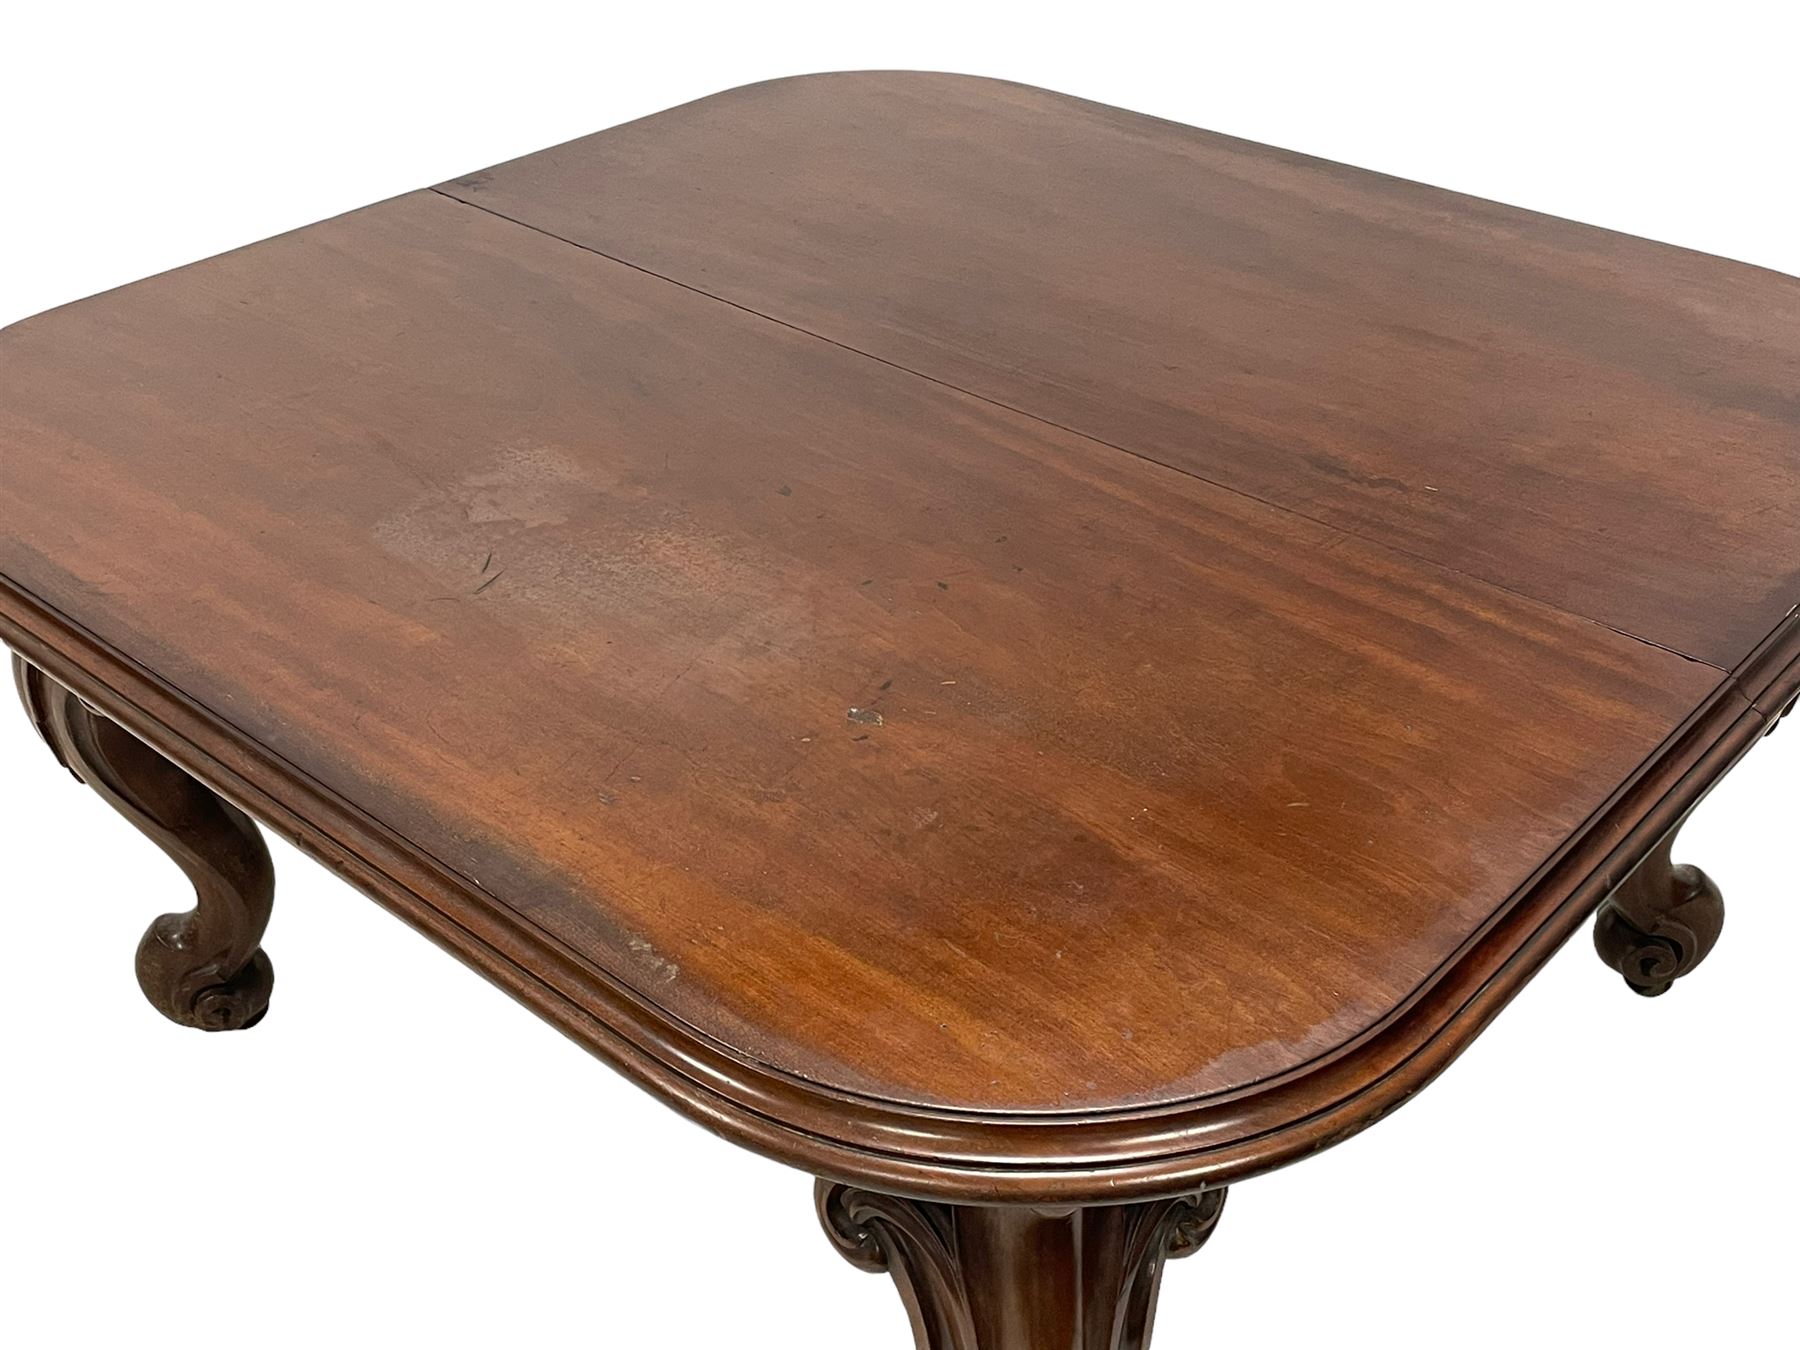 Large 19th century mahogany dining table - Image 4 of 30